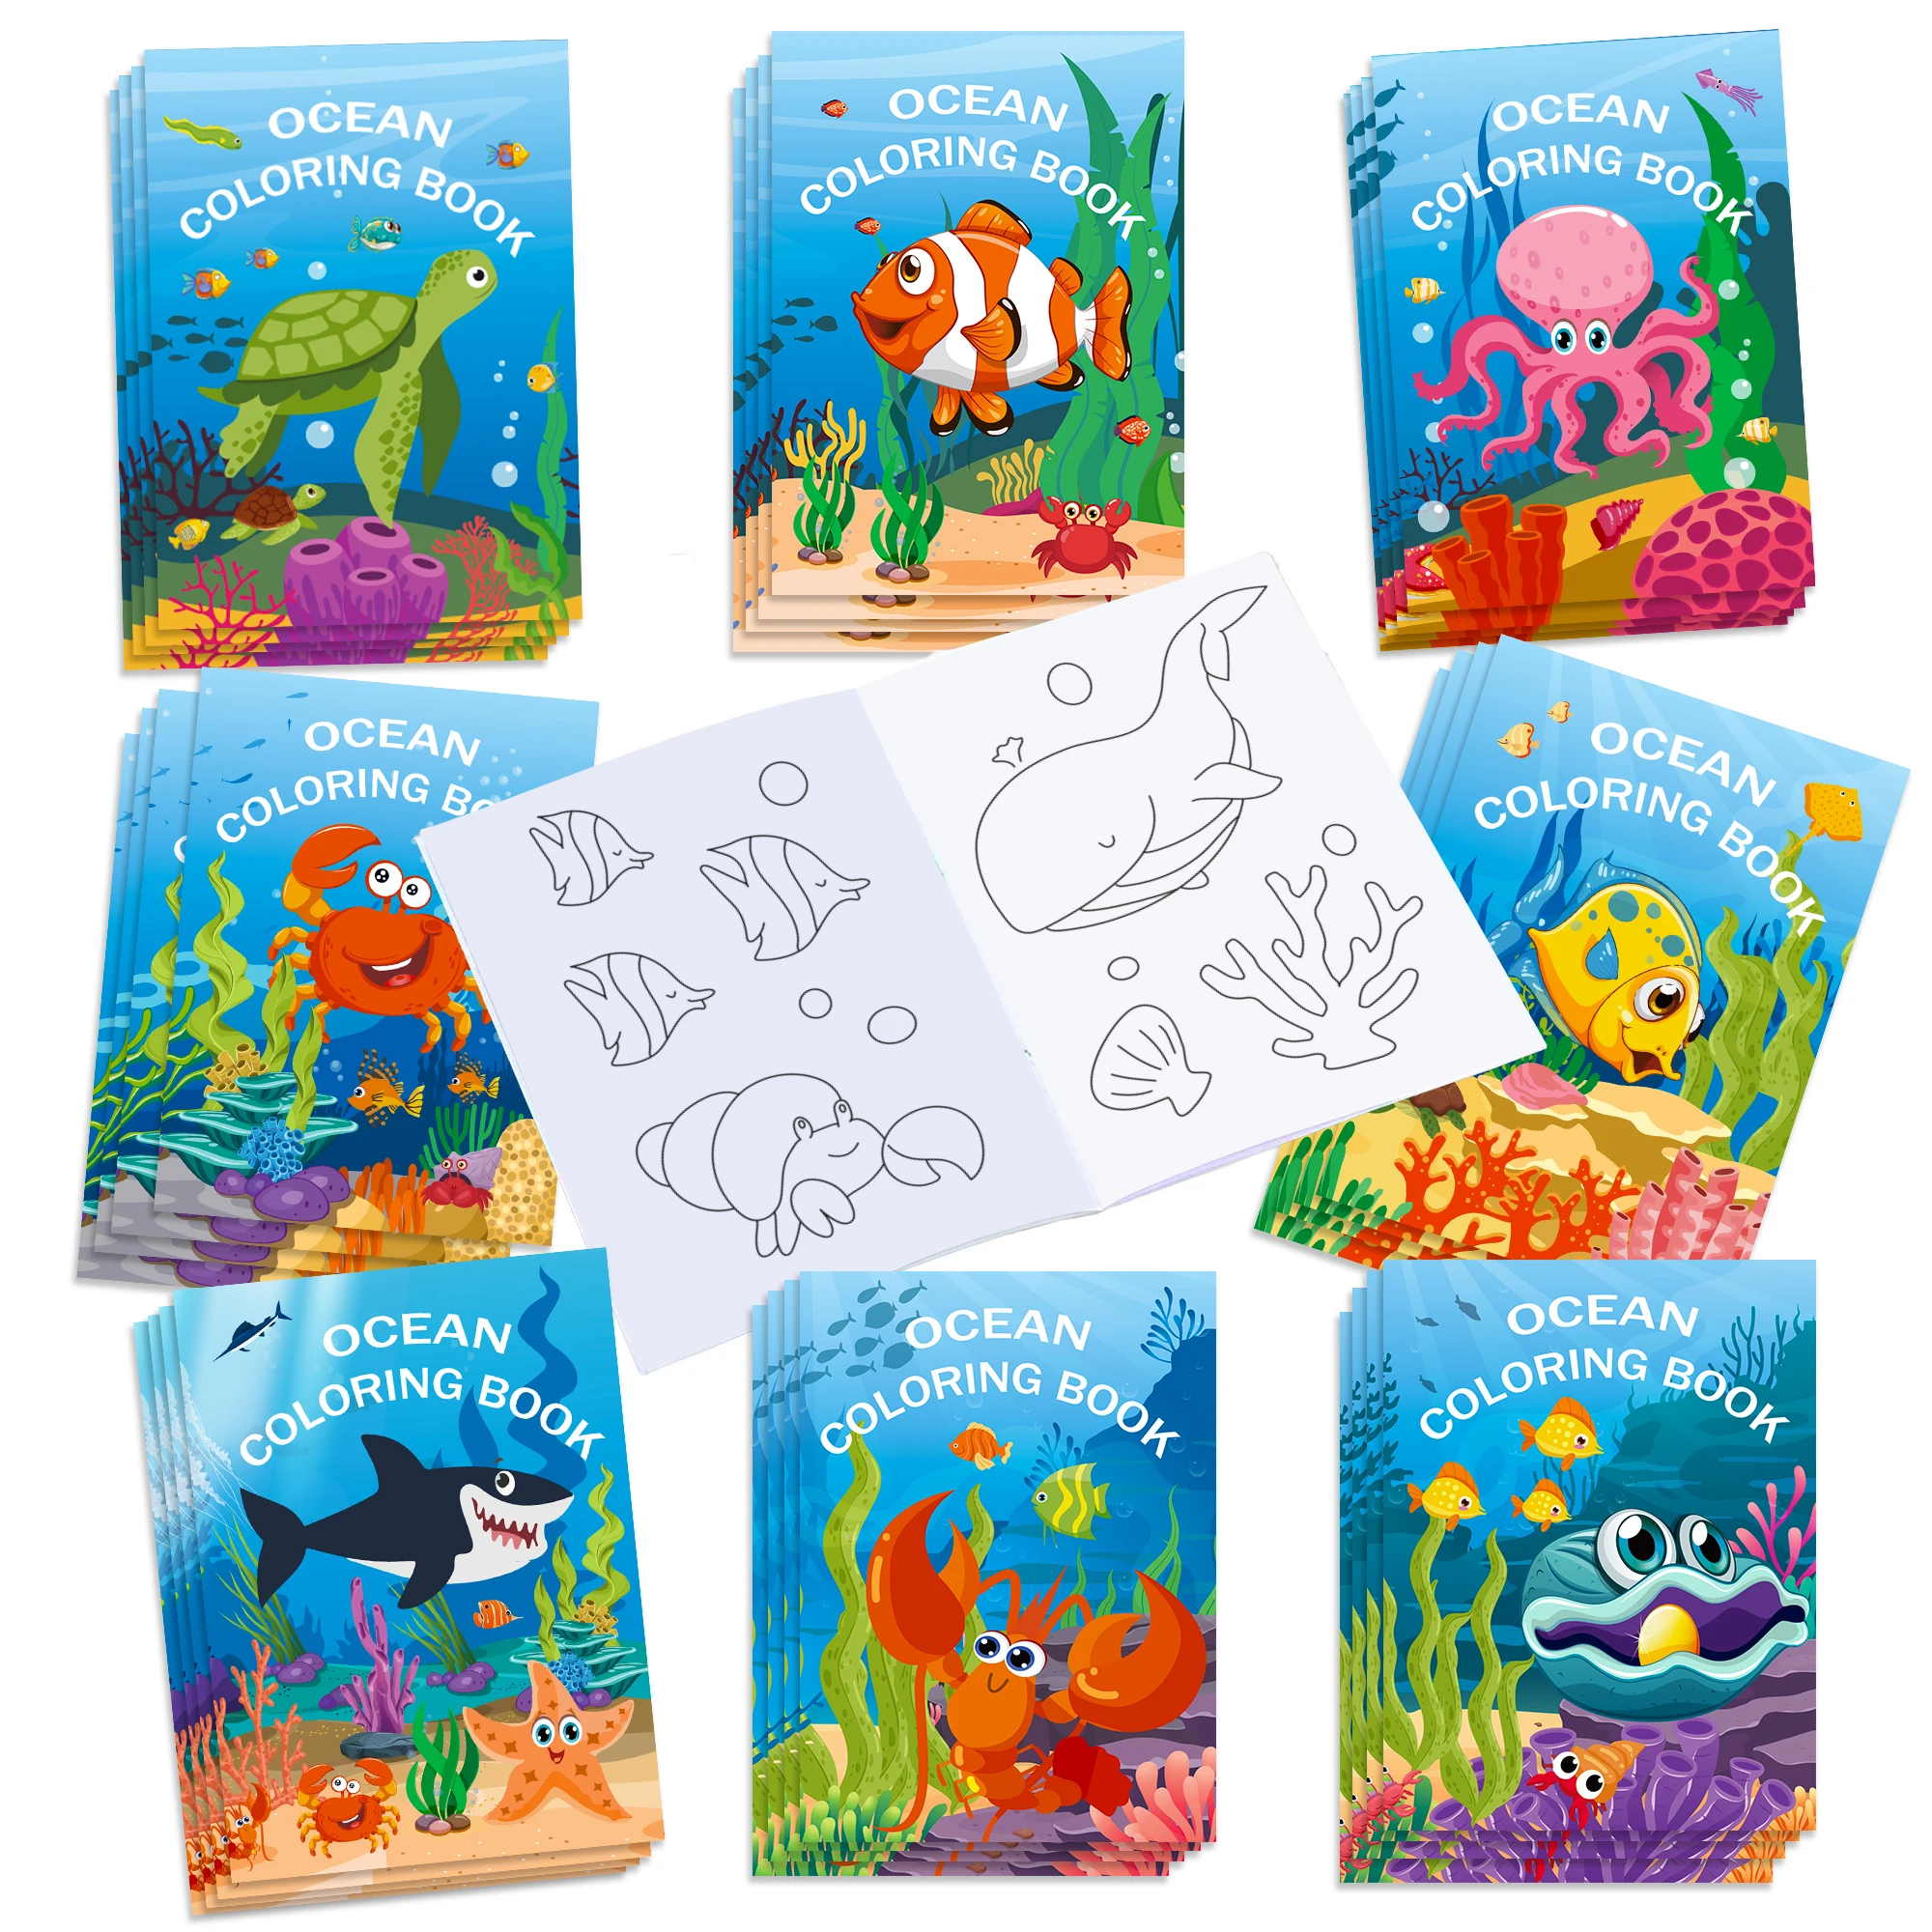 

16pcs Fish Cartoon The world under the sea Painting Educational Toy for Girls Boys Gift DIY Graffiti Scroll Color Filling Books